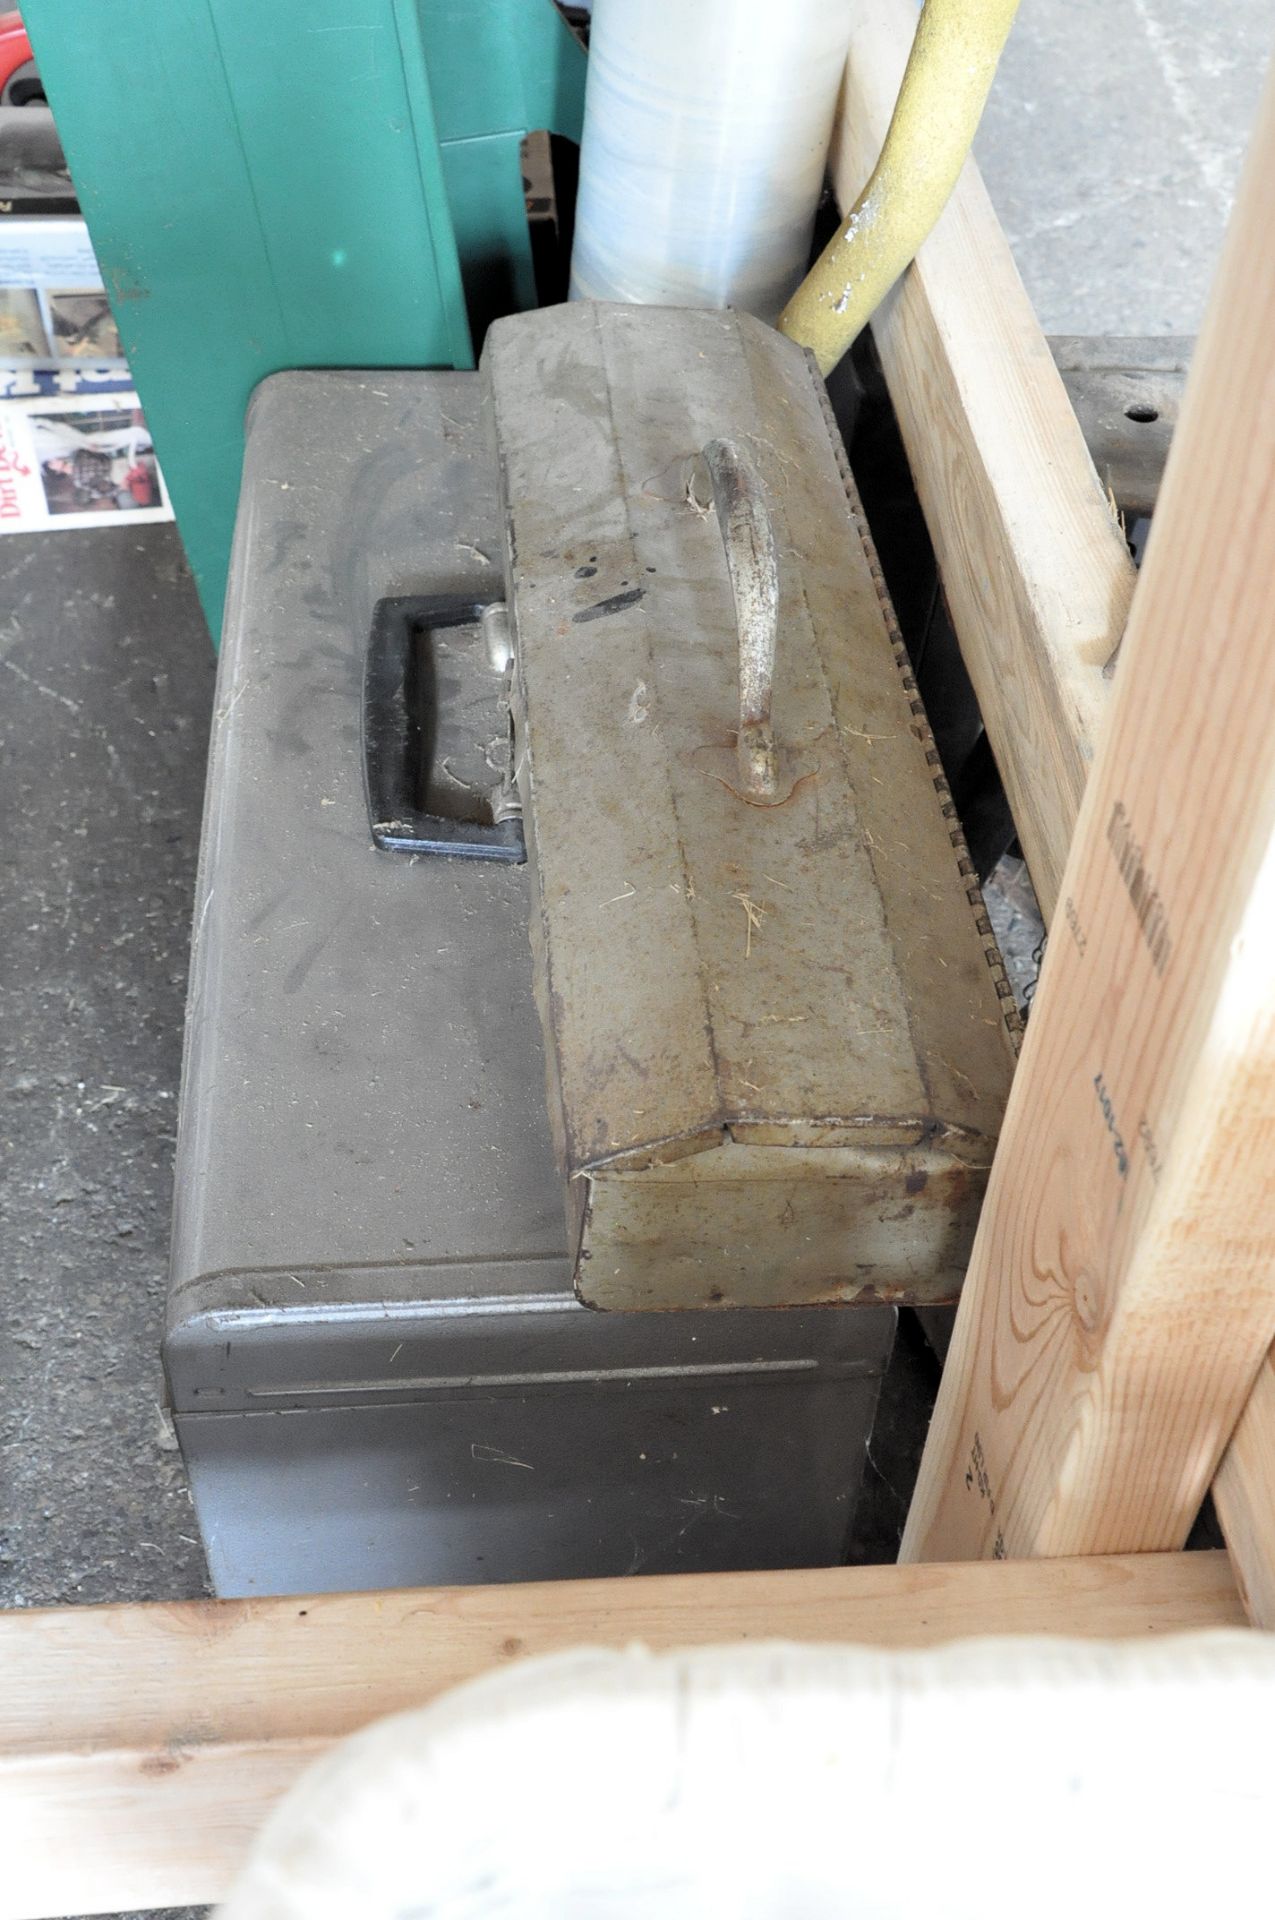 Lot-Tote Tool Boxes, Stretch Wrap, Sledge Hammer, Car Vac, and Jack Stands Under (1) Bench - Image 3 of 3